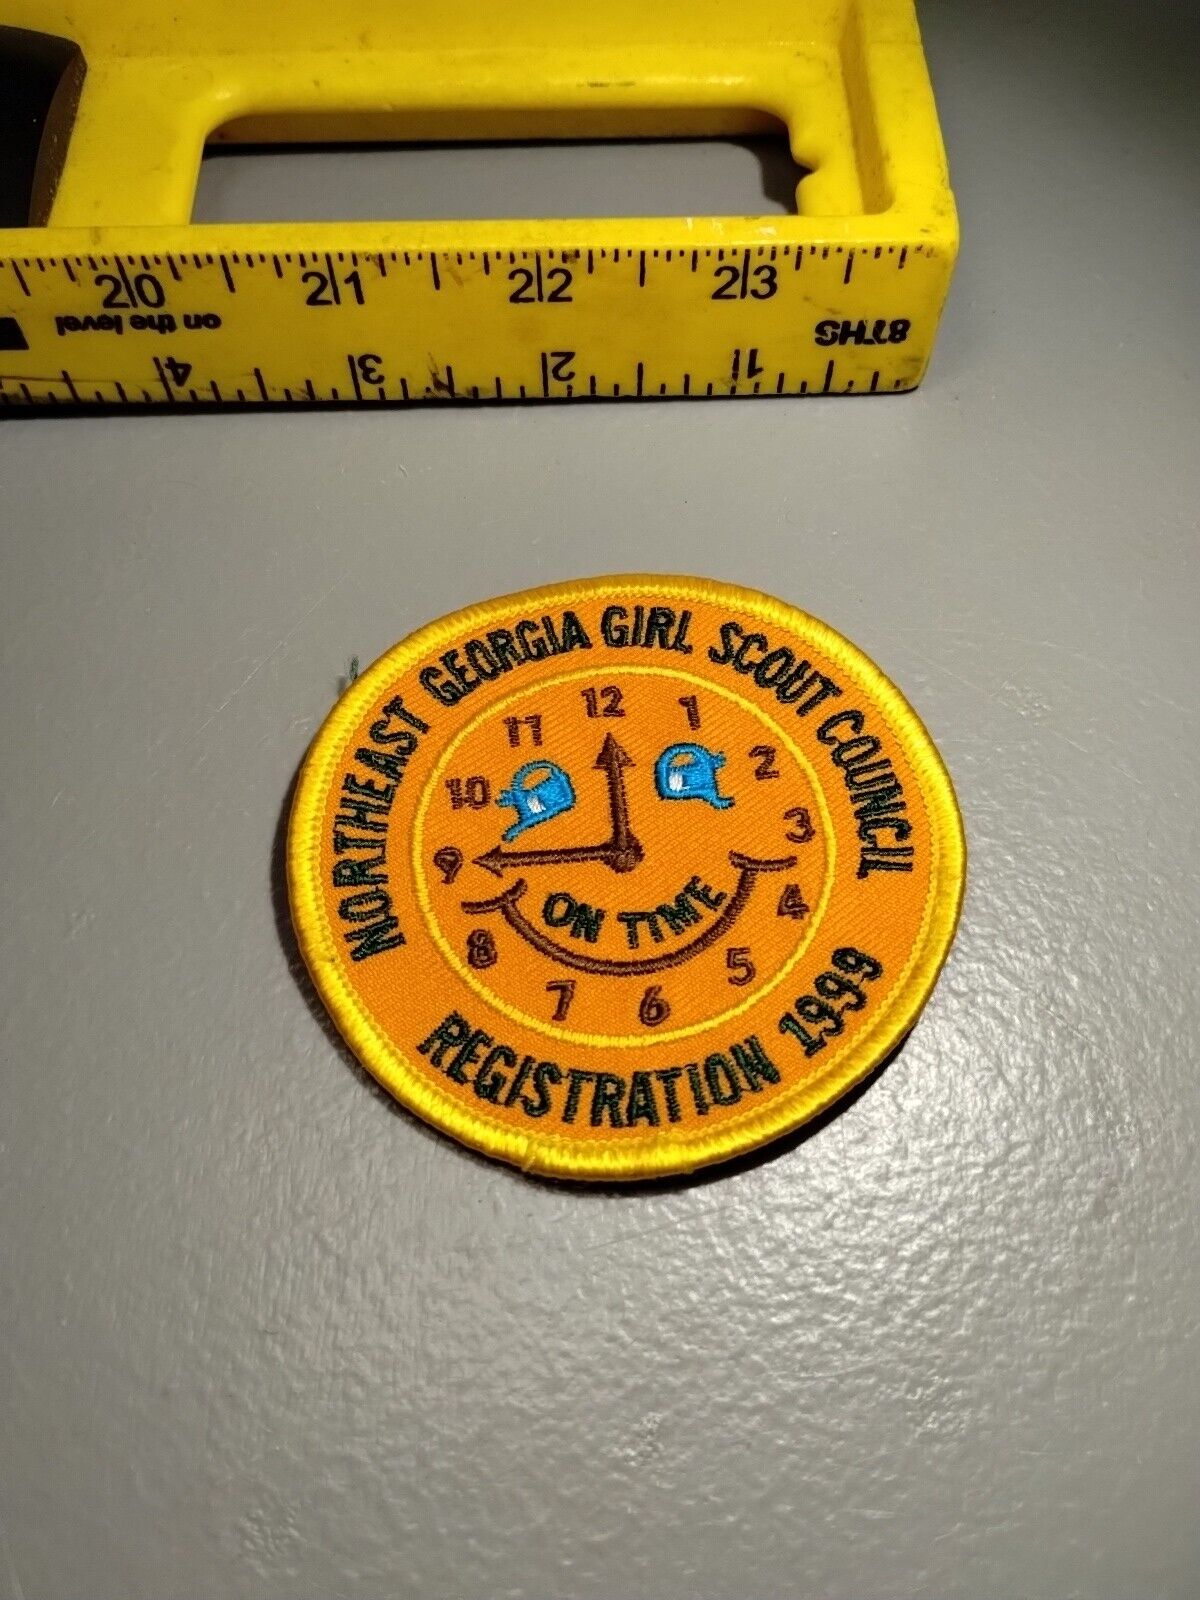 Vintage 1999 Northeast Georgia Girl Scout Council On Time Registration Patch A4